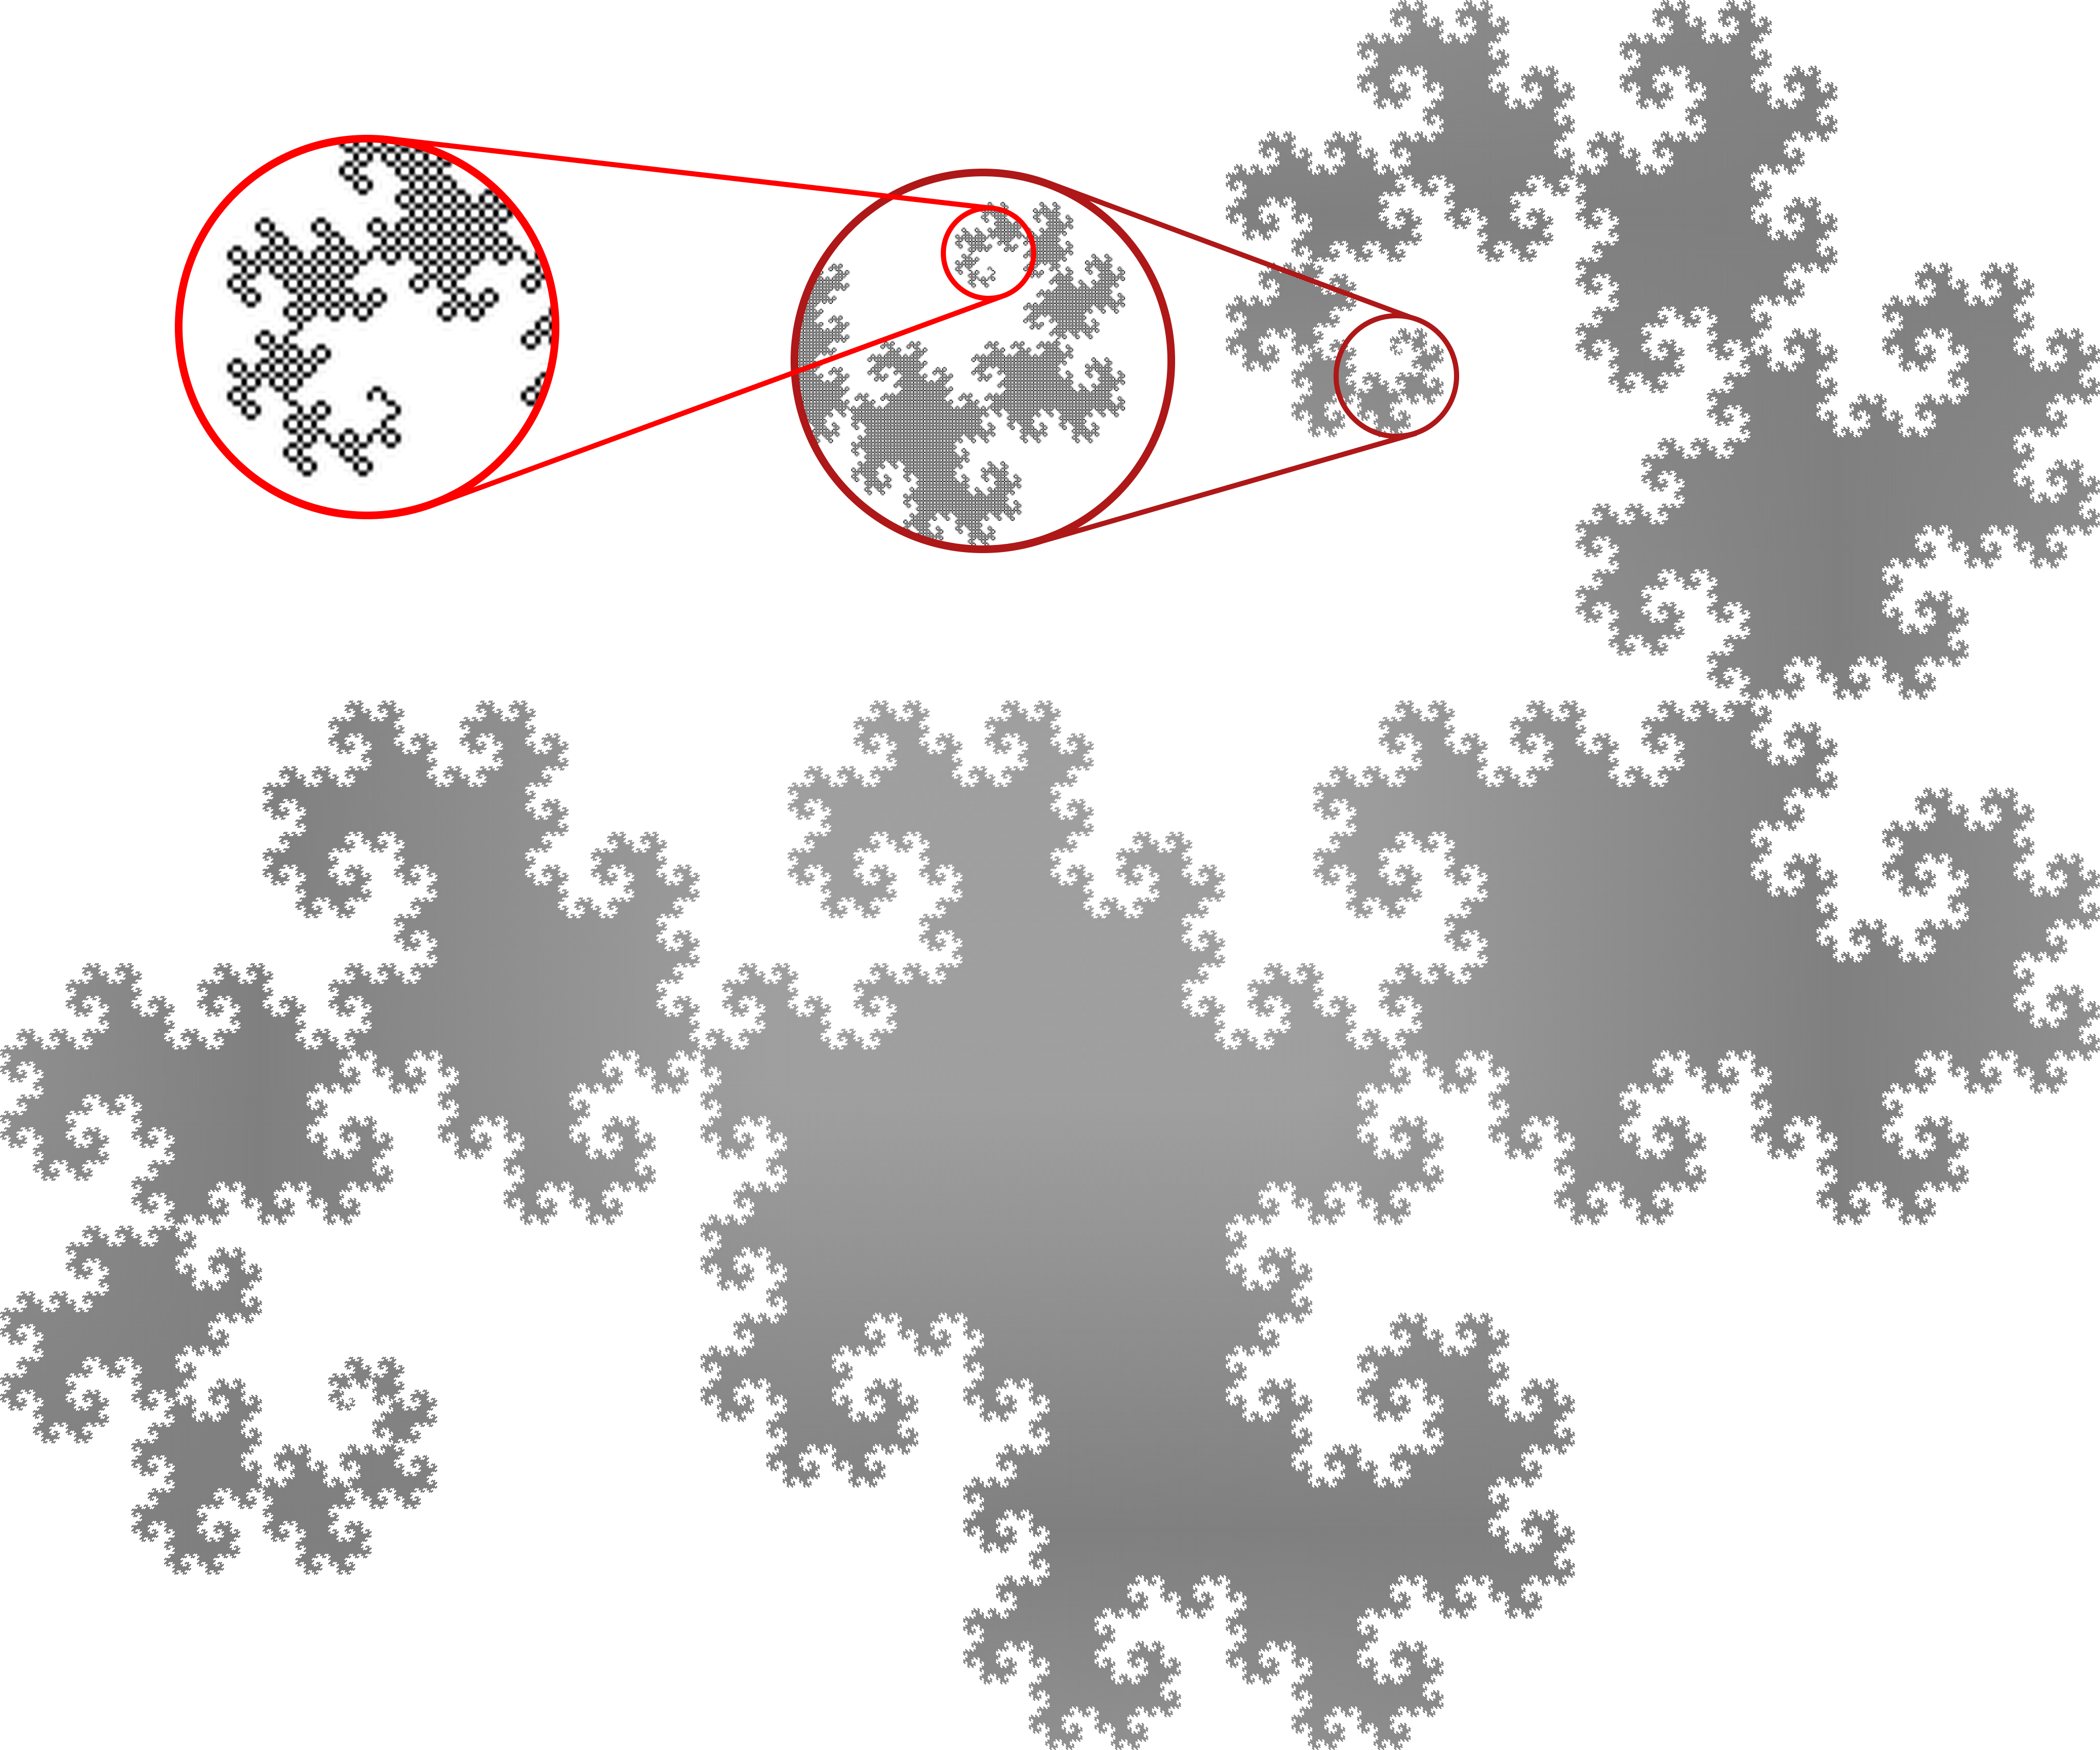  20th iteration of the dragon curve